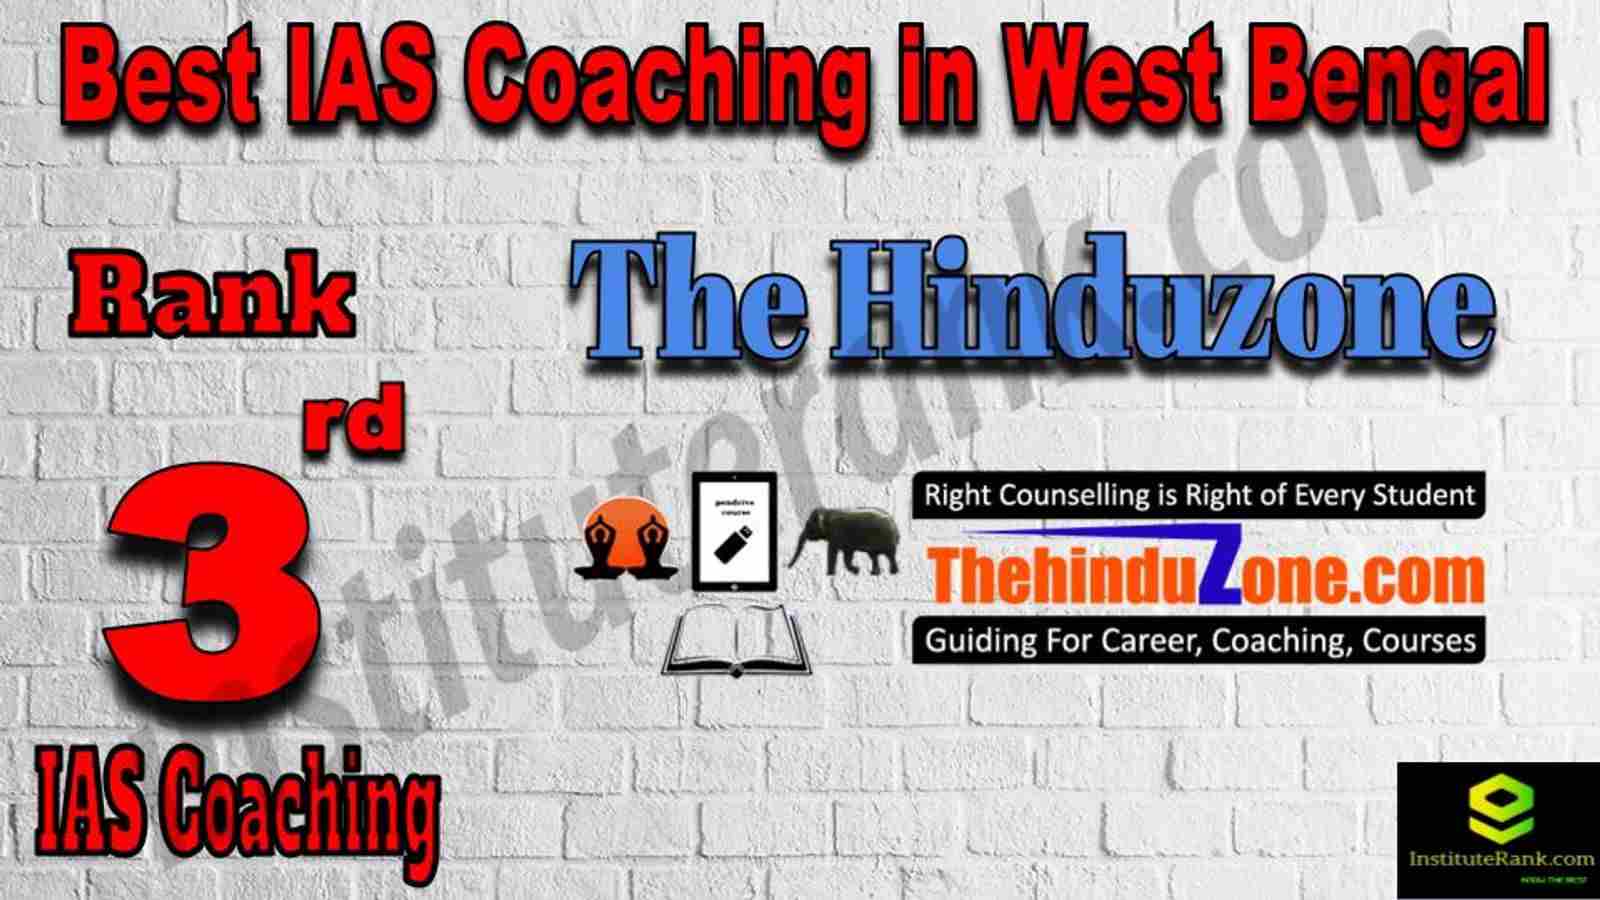 3rd Best IAS Coaching in West Bengal